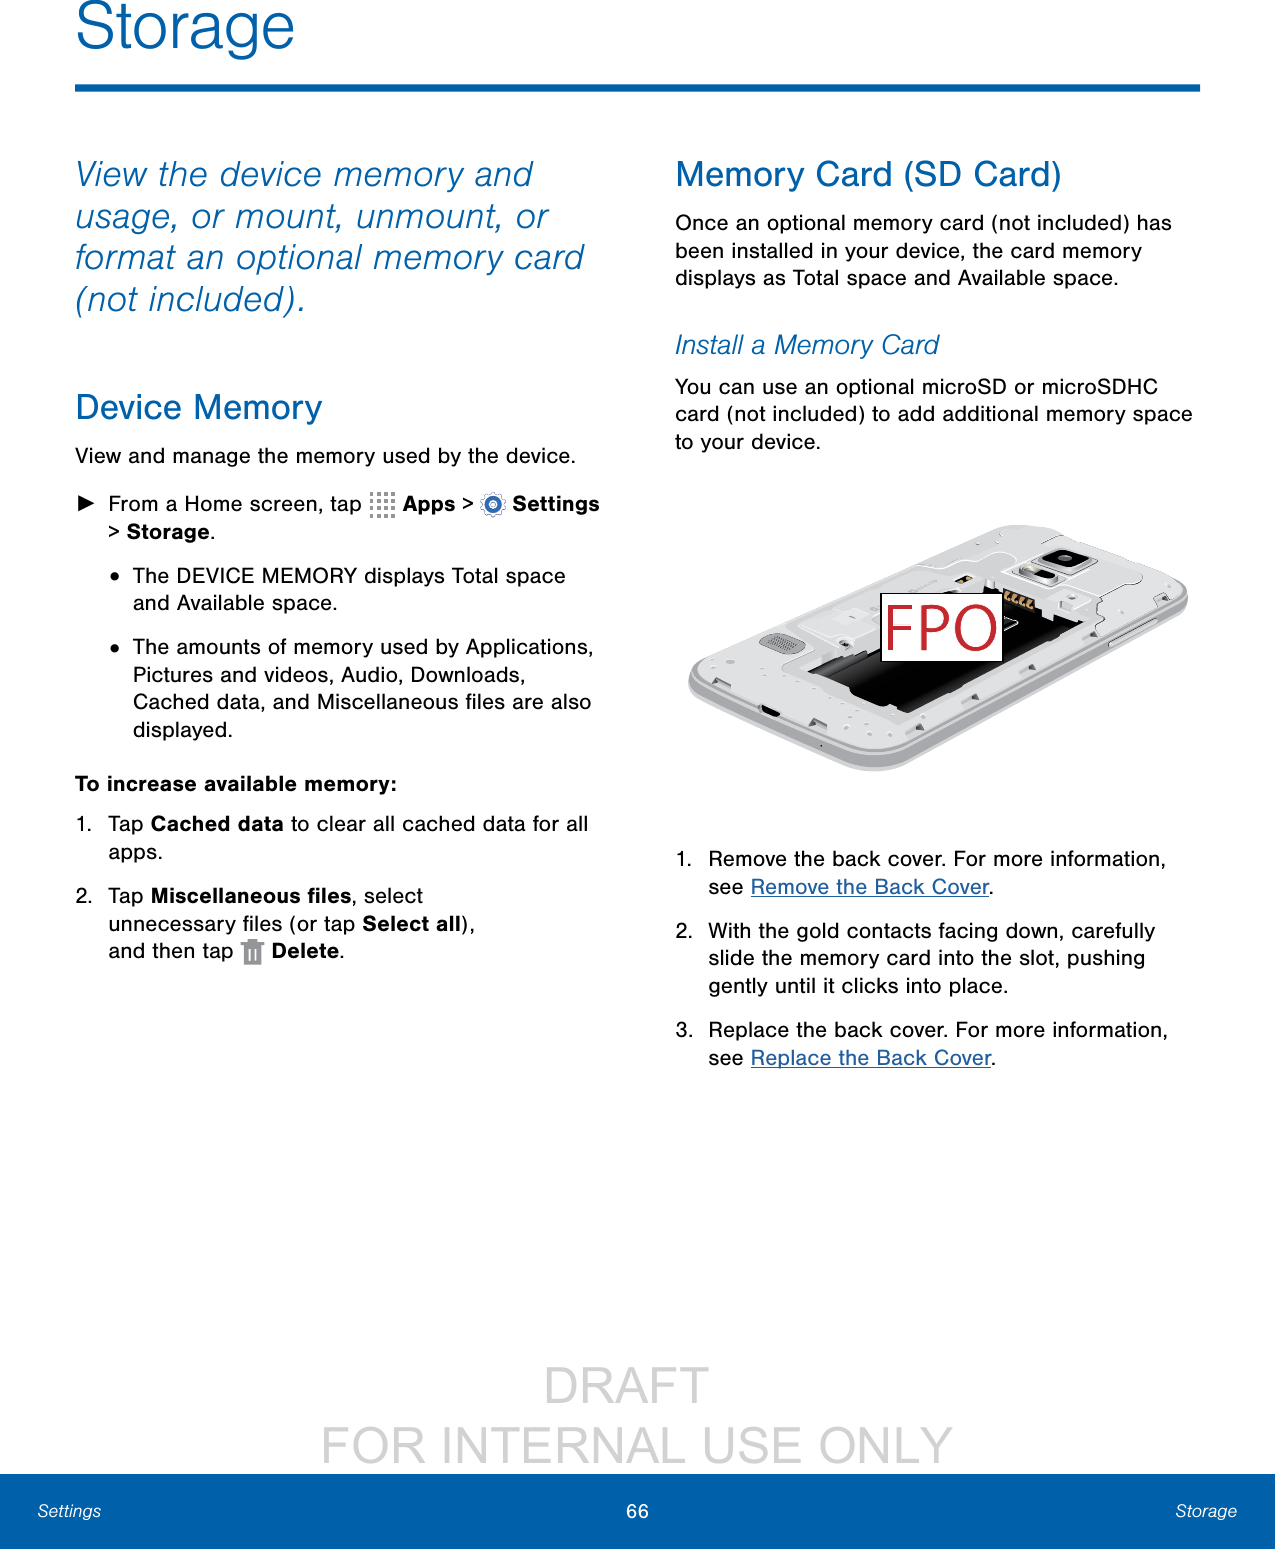                 DRAFT FOR INTERNAL USE ONLY66 StorageSettingsStorageView the device memory and usage, or mount, unmount, or format an optional memory card (not included).Device MemoryView and manage the memory used by the device. ►From a Home screen, tap   Apps &gt;  Settings &gt; Storage.•  The DEVICE MEMORY displays Total space and Available space.•  The amounts of memory used by Applications, Pictures and videos, Audio, Downloads, Cached data, and Miscellaneous ﬁles are also displayed.To increase available memory:1.  Tap Cached data to clear all cached data for all apps.2.  Tap Miscellaneous ﬁles, select unnecessaryﬁles (or tap Select all), andthentap   Delete.Memory Card (SD Card)Once an optional memory card (not included) has been installed in your device, the card memory displays as Total space and Available space.Install a Memory CardYou can use an optional microSD or microSDHC card (not included) to add additional memory space to your device. 1.  Remove the back cover. For more information, see Remove the Back Cover.2.  With the gold contacts facing down, carefully slide the memory card into the slot, pushing gently until it clicks into place.3.  Replace the back cover. For more information, see Replace the Back Cover.